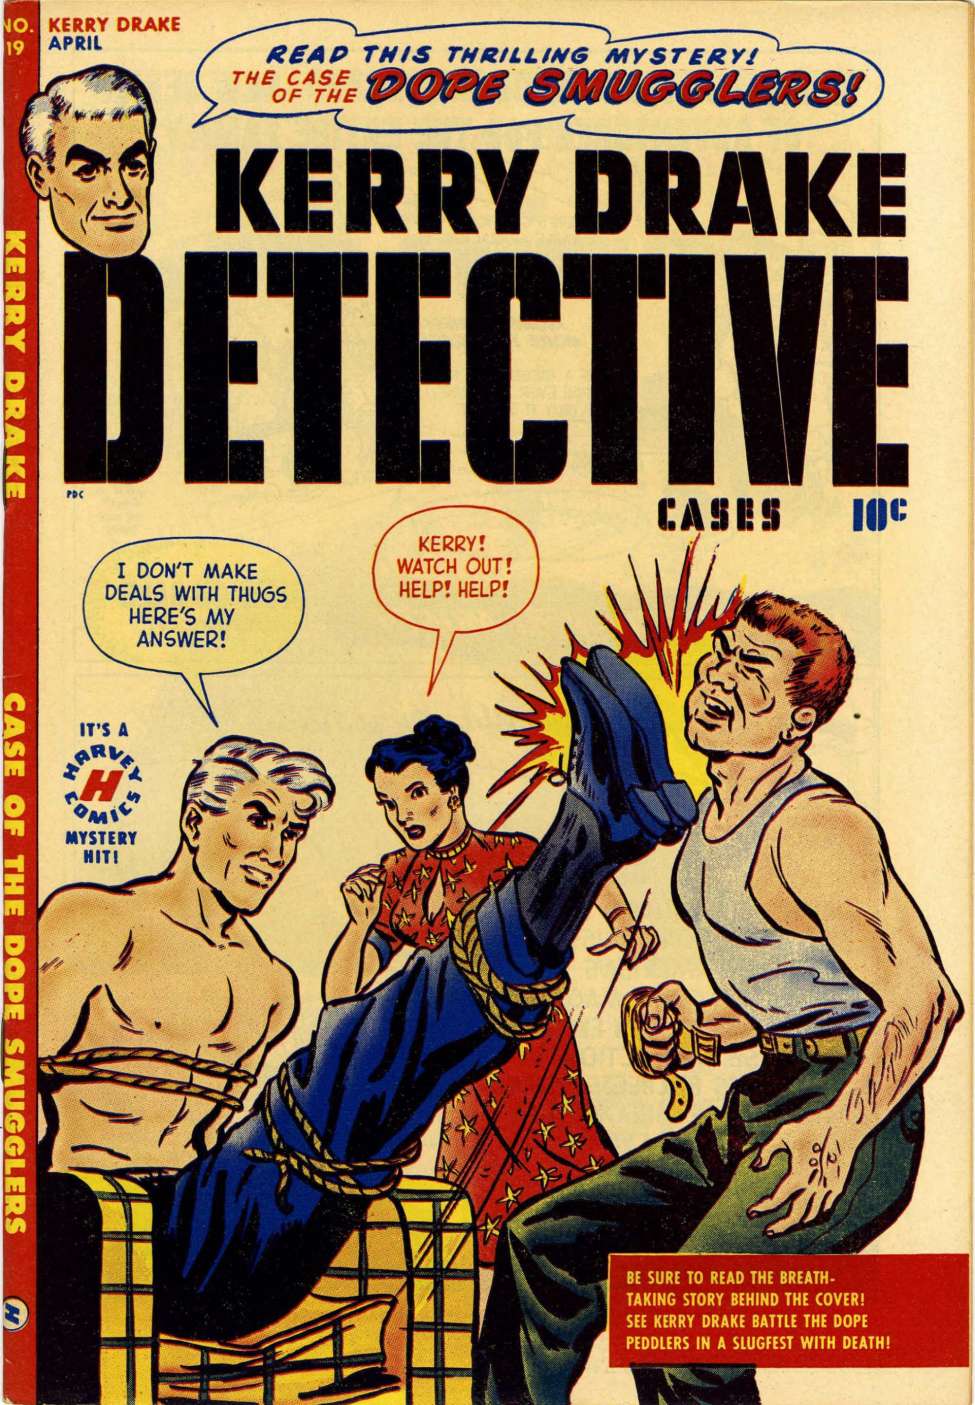 Comic Book Cover For Kerry Drake Detective Cases 19